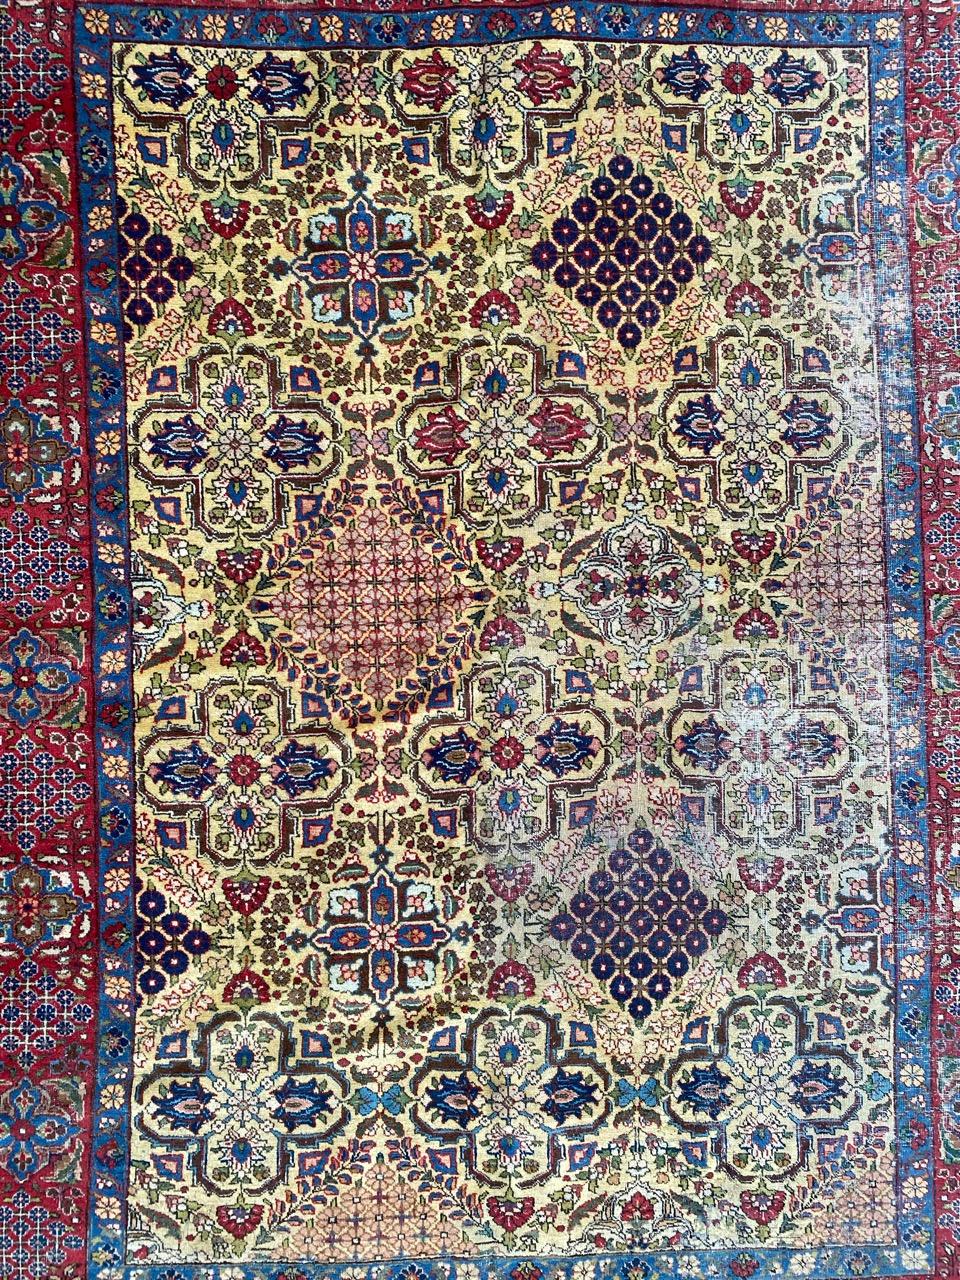 A captivating early 20th-century rug, a testament to timeless artistry. This masterpiece features a decorative design and vibrant colors – yellow, blue, green, red, and pink. Entirely hand-knotted with wool velvet on a cotton foundation, it boasts